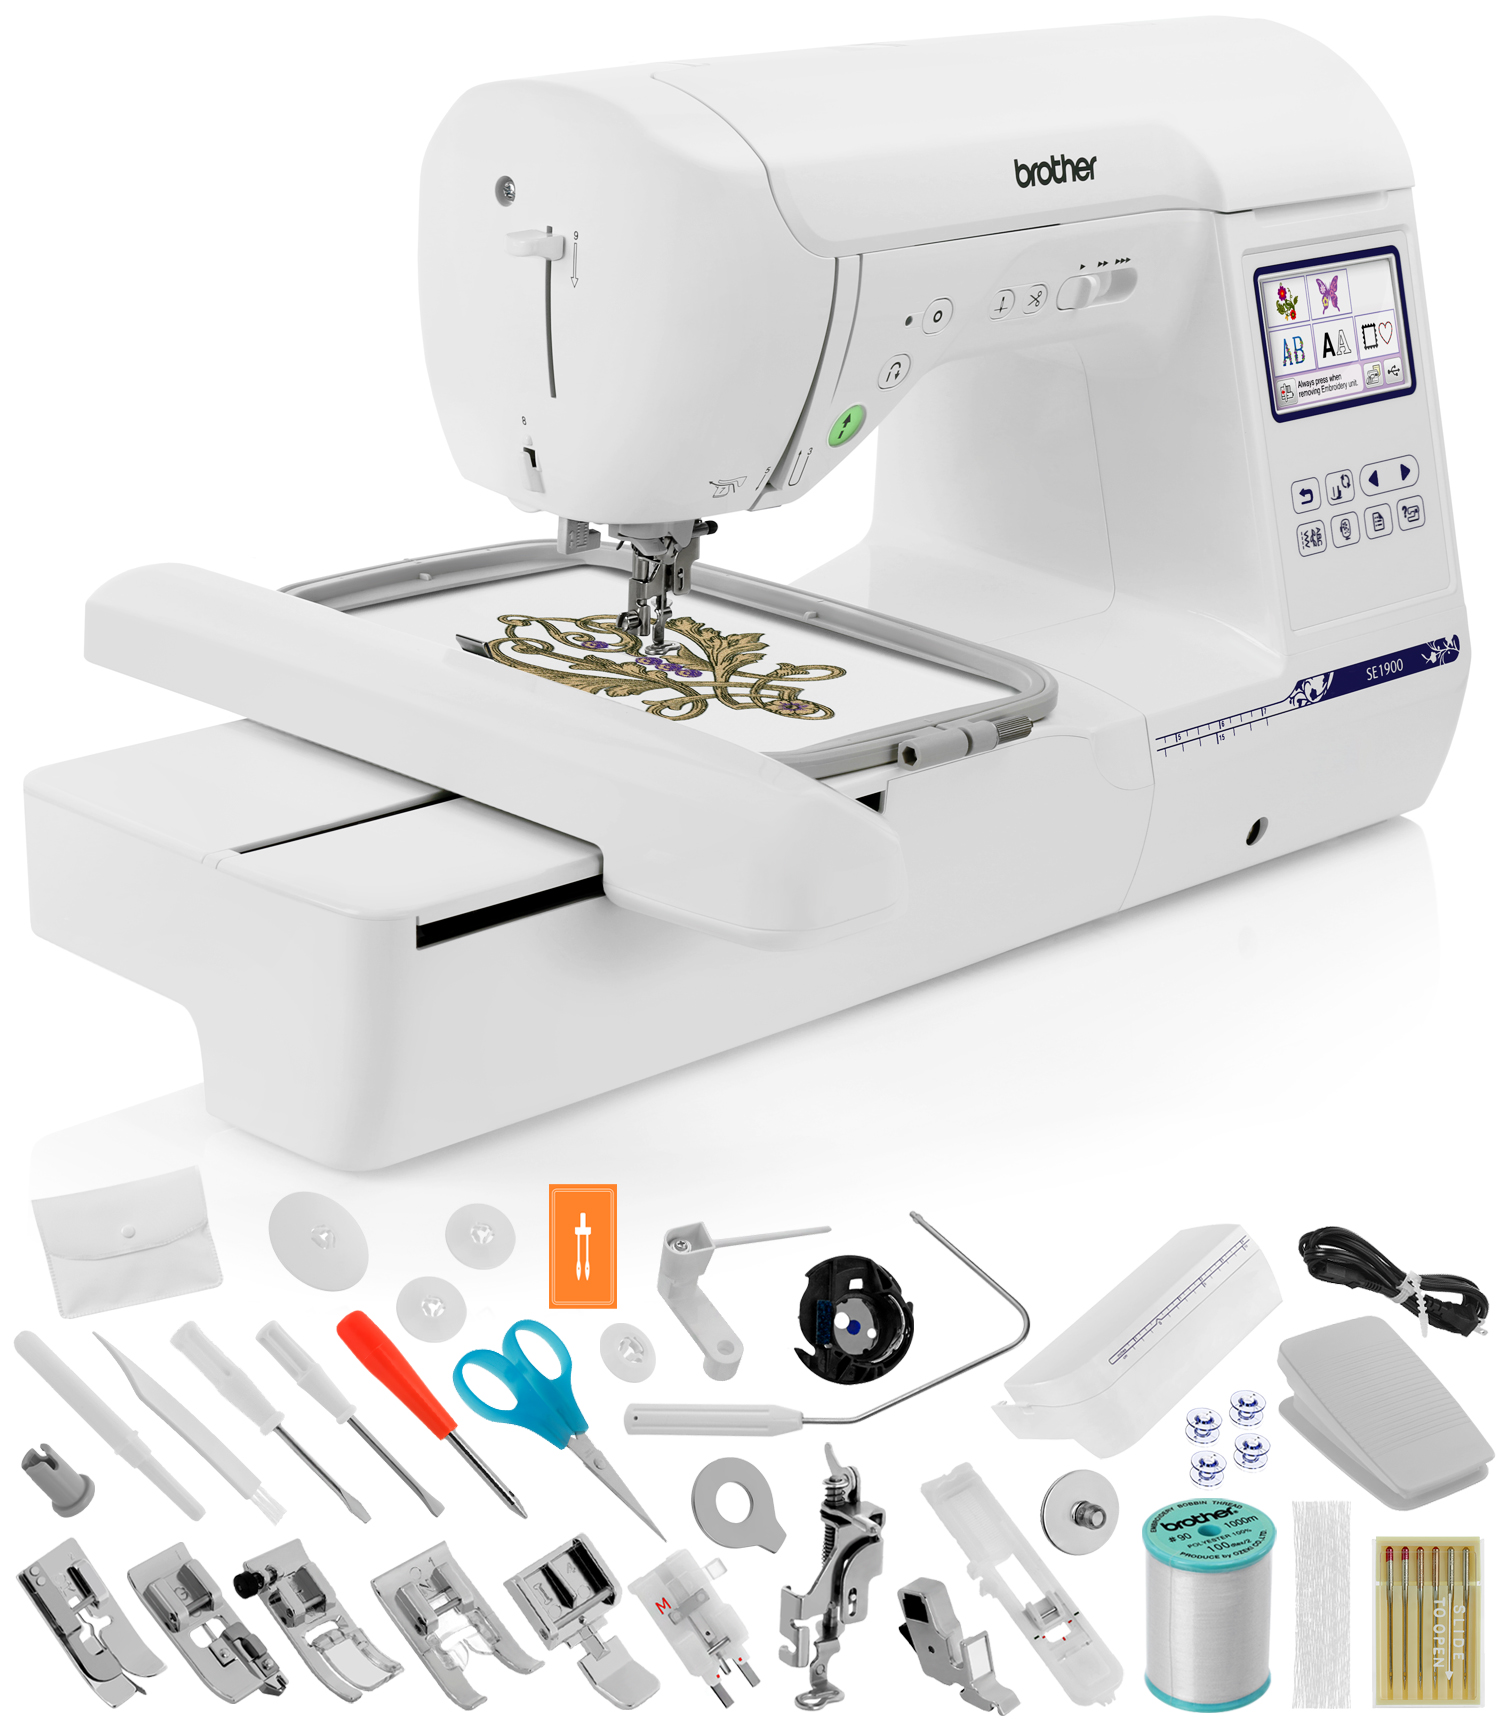 Brother SE1900 (SE 1900) Sewing and Embroidery Machine / Optional Grand Slam Embroidery Package